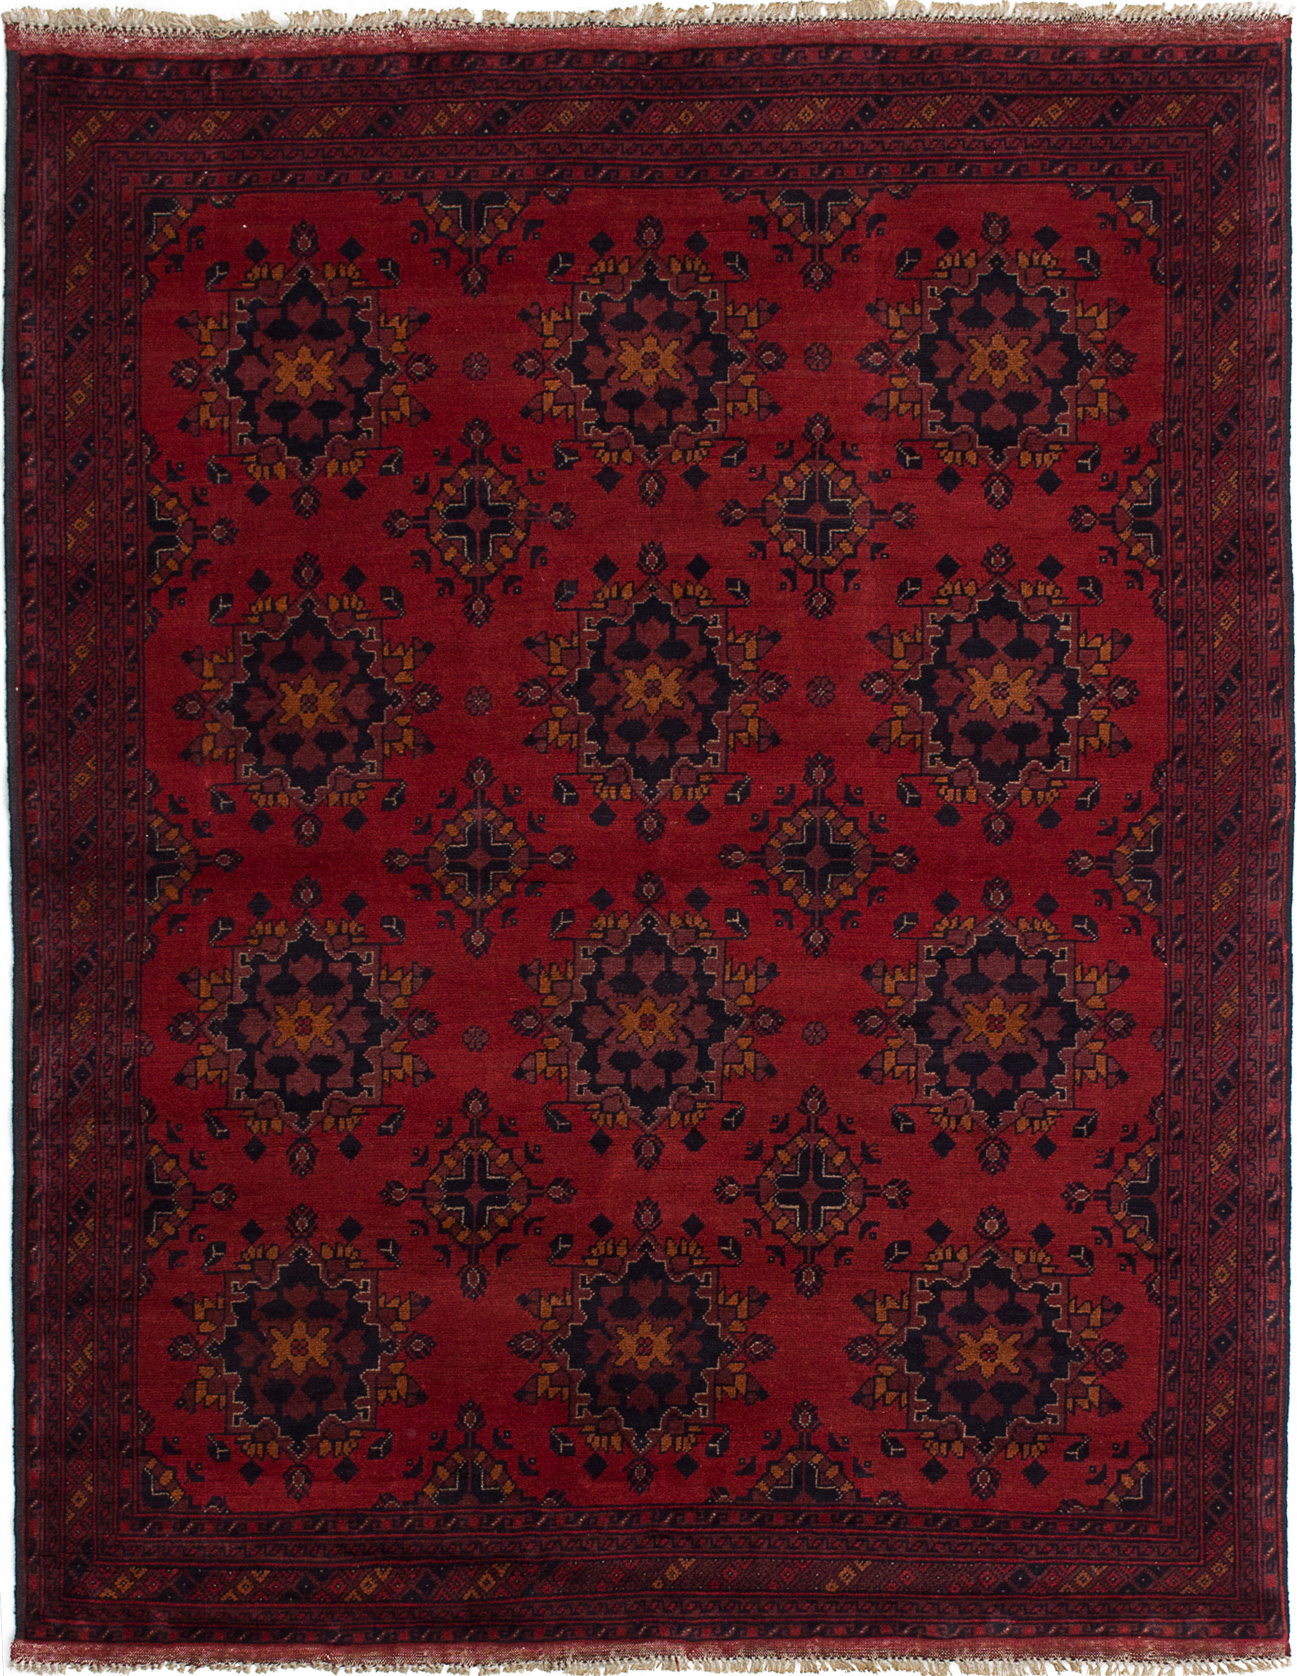 Hand-knotted Finest Khal Mohammadi Red Wool Rug 5'0" x 6'5" (20) Size: 5'0" x 6'5"  